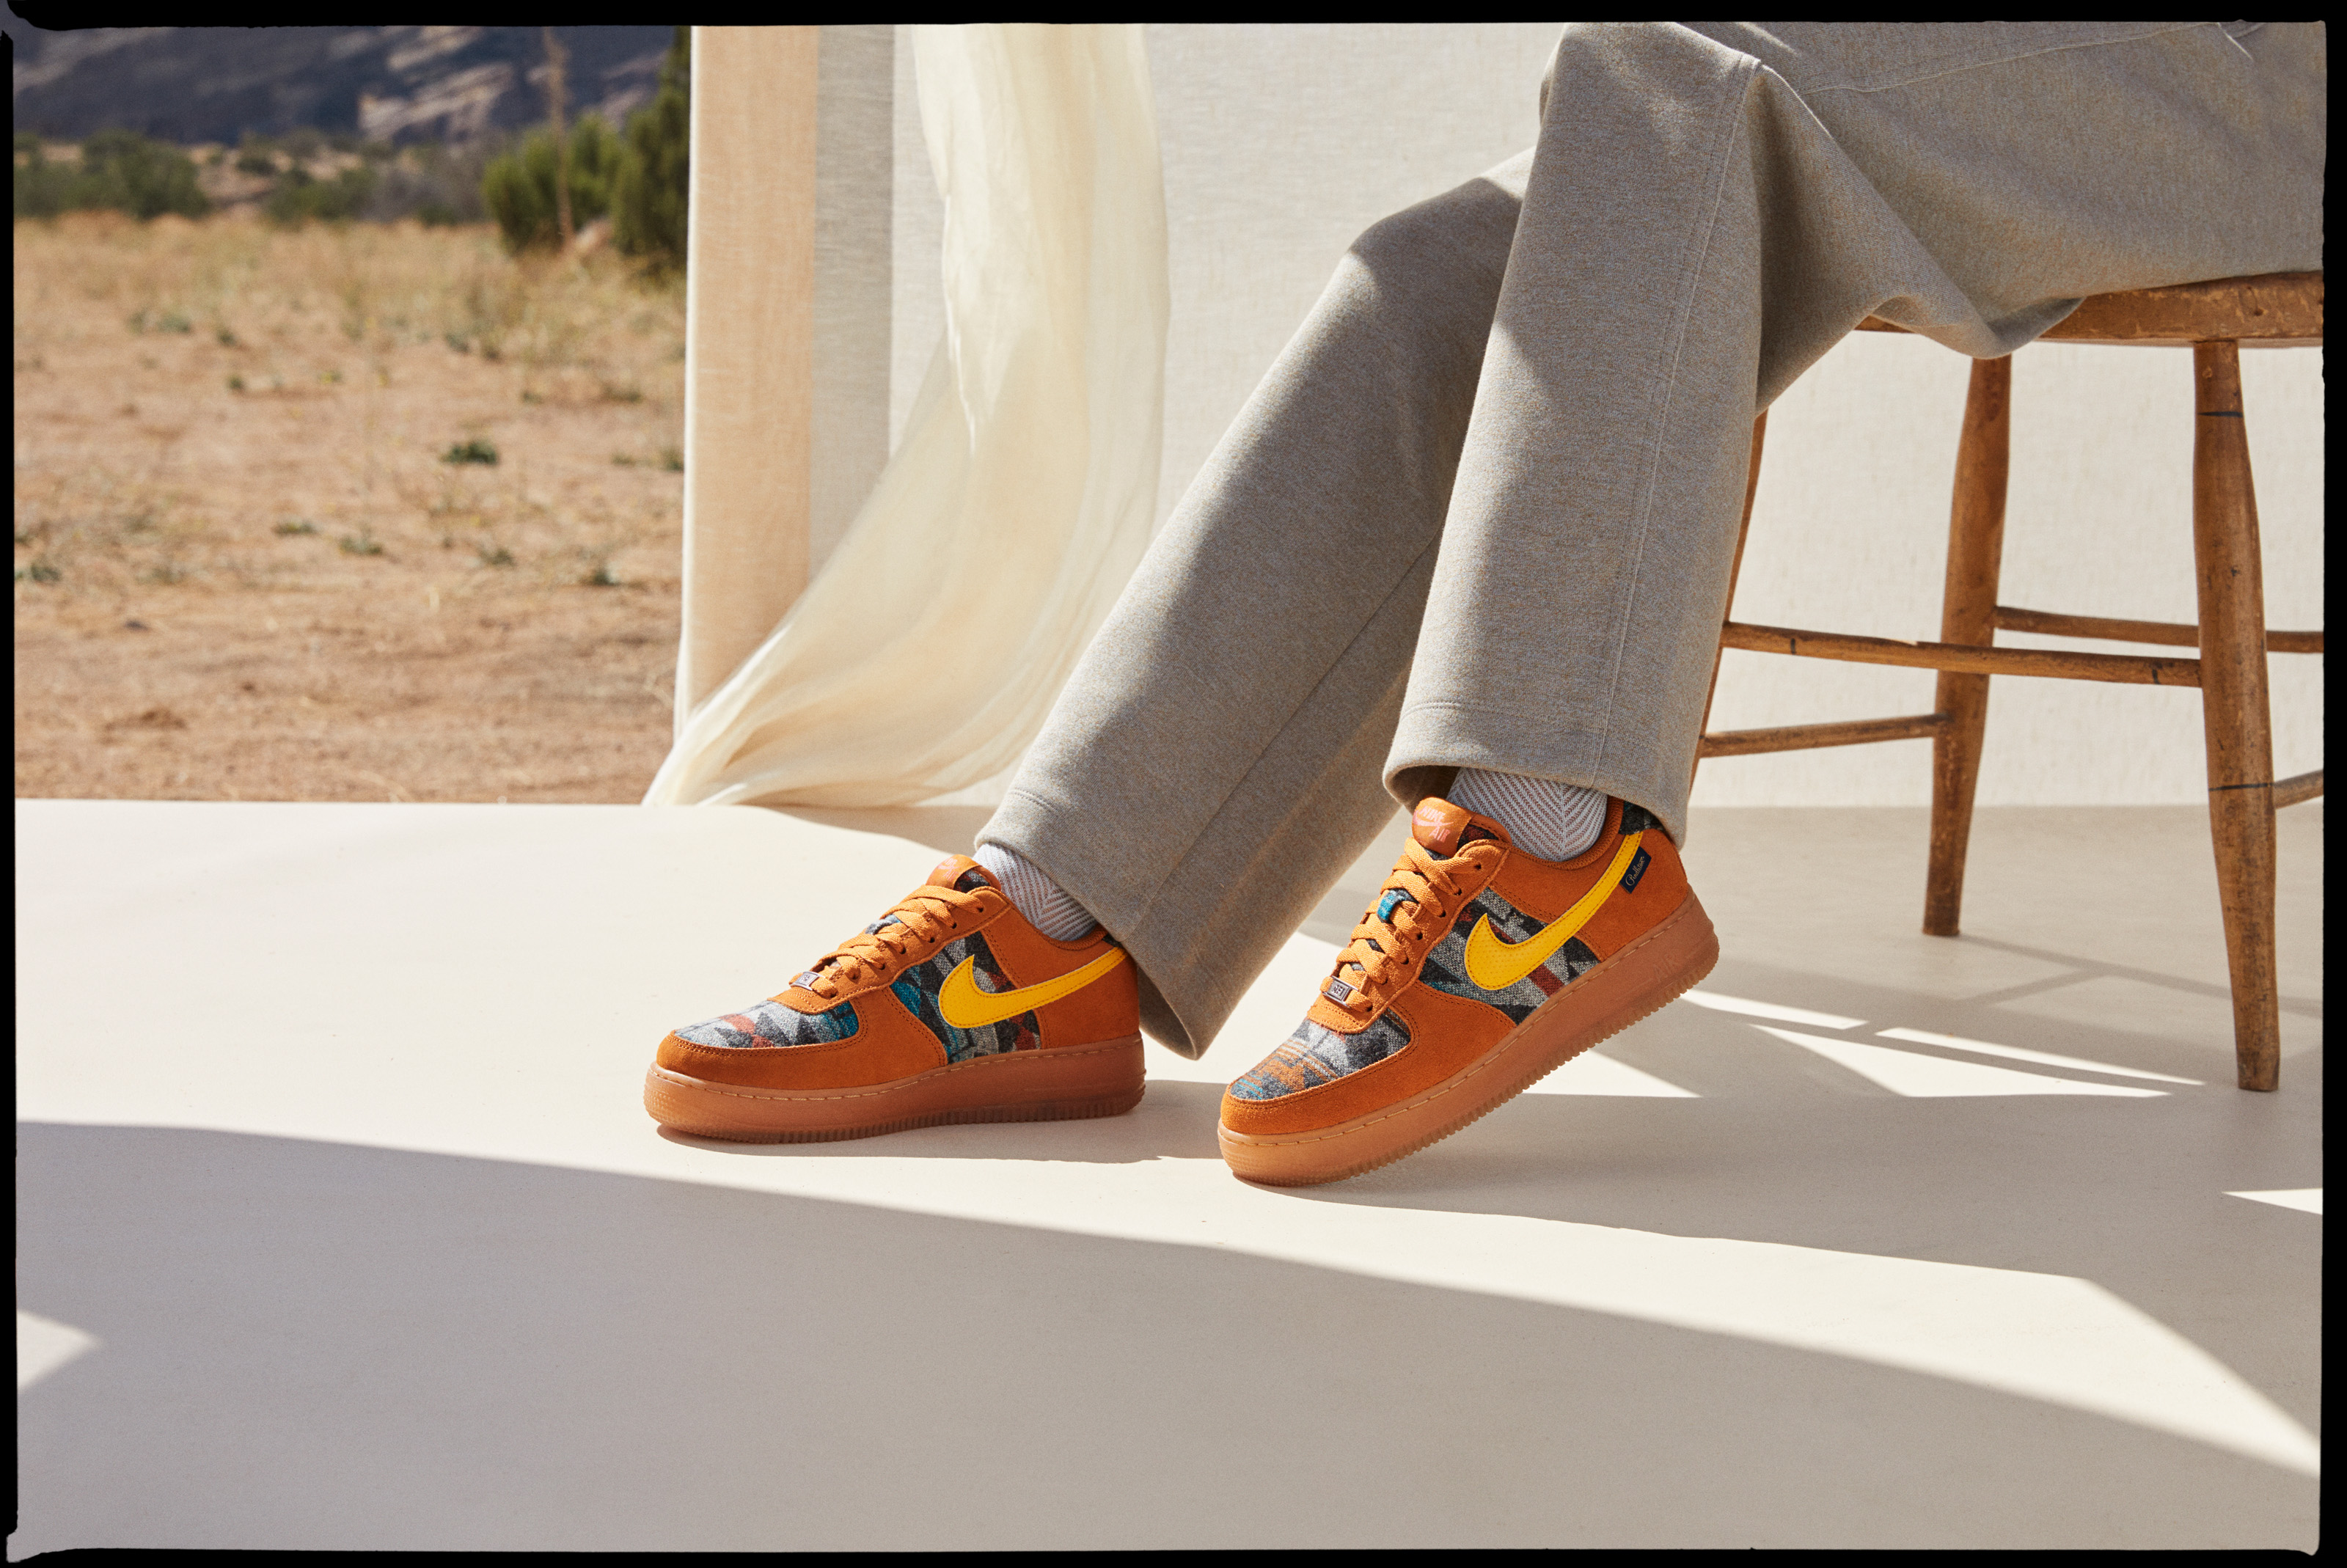 Hertog absorptie intern The Nike Pendelton Collection Features Indigenous Creators and Designs